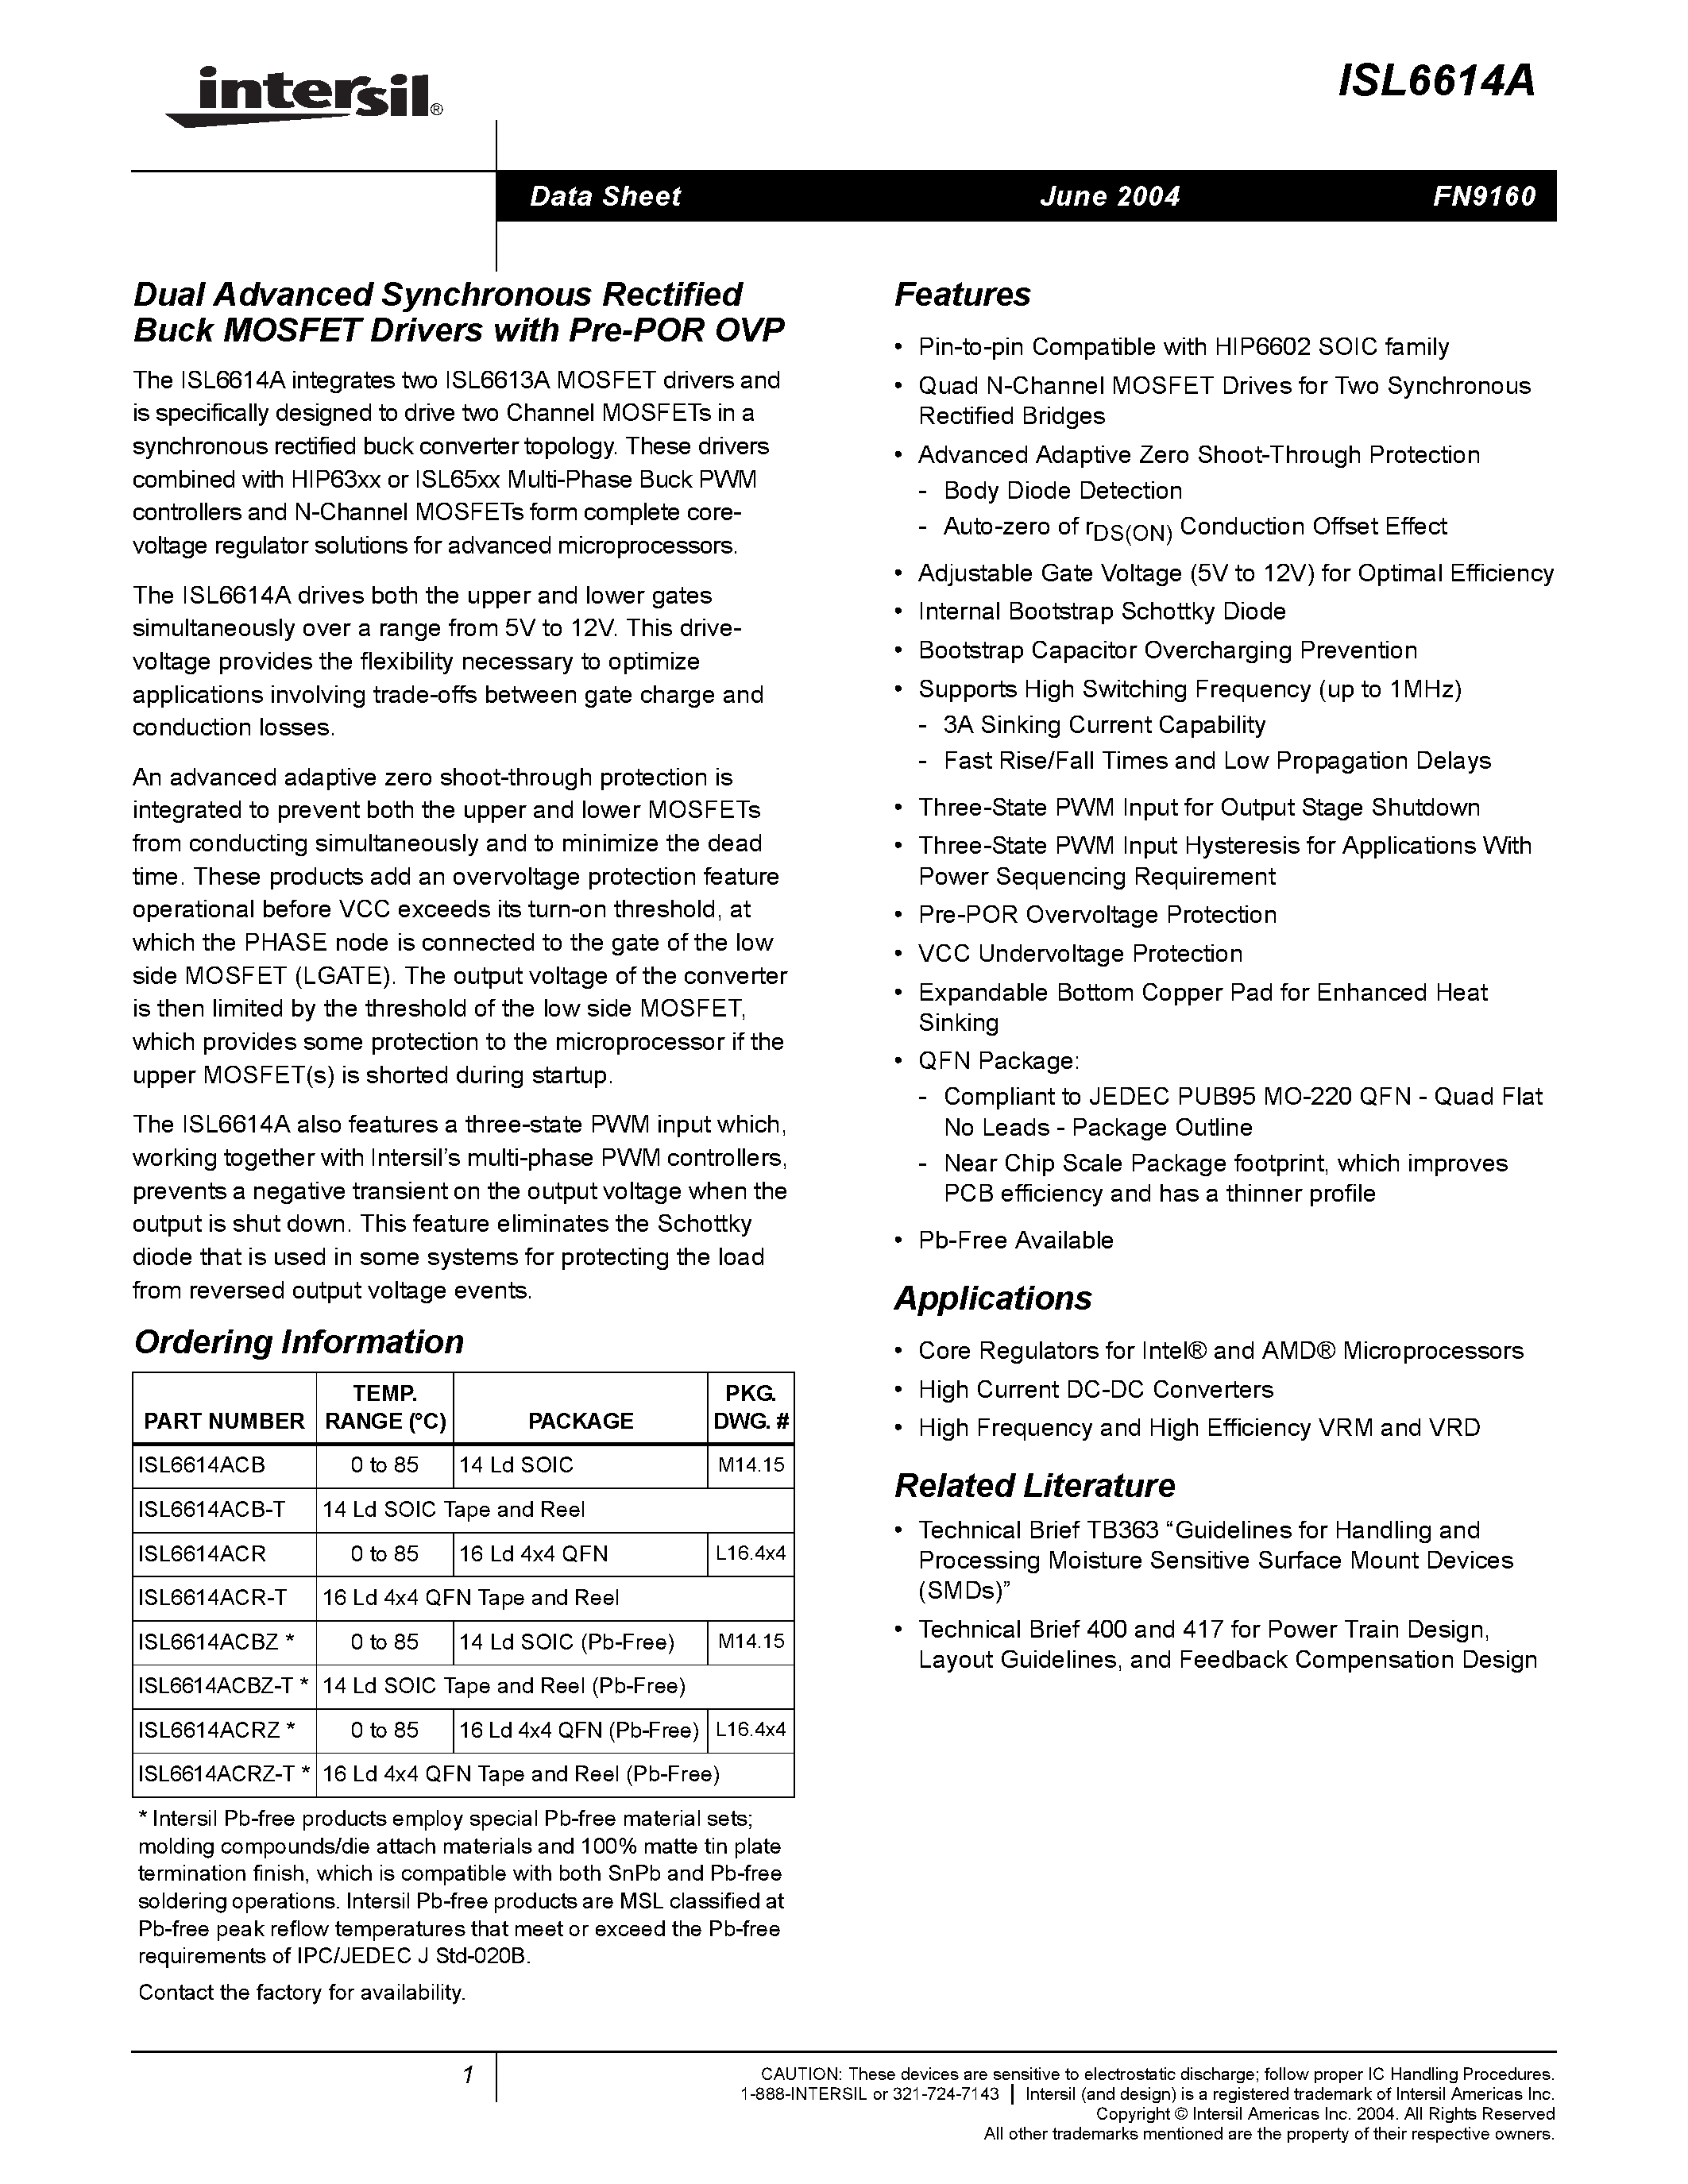 Datasheet ISL6614ACR - Dual Advanced Synchronous Rectified Buck MOSFET Drivers with Pre-POR OVP page 1